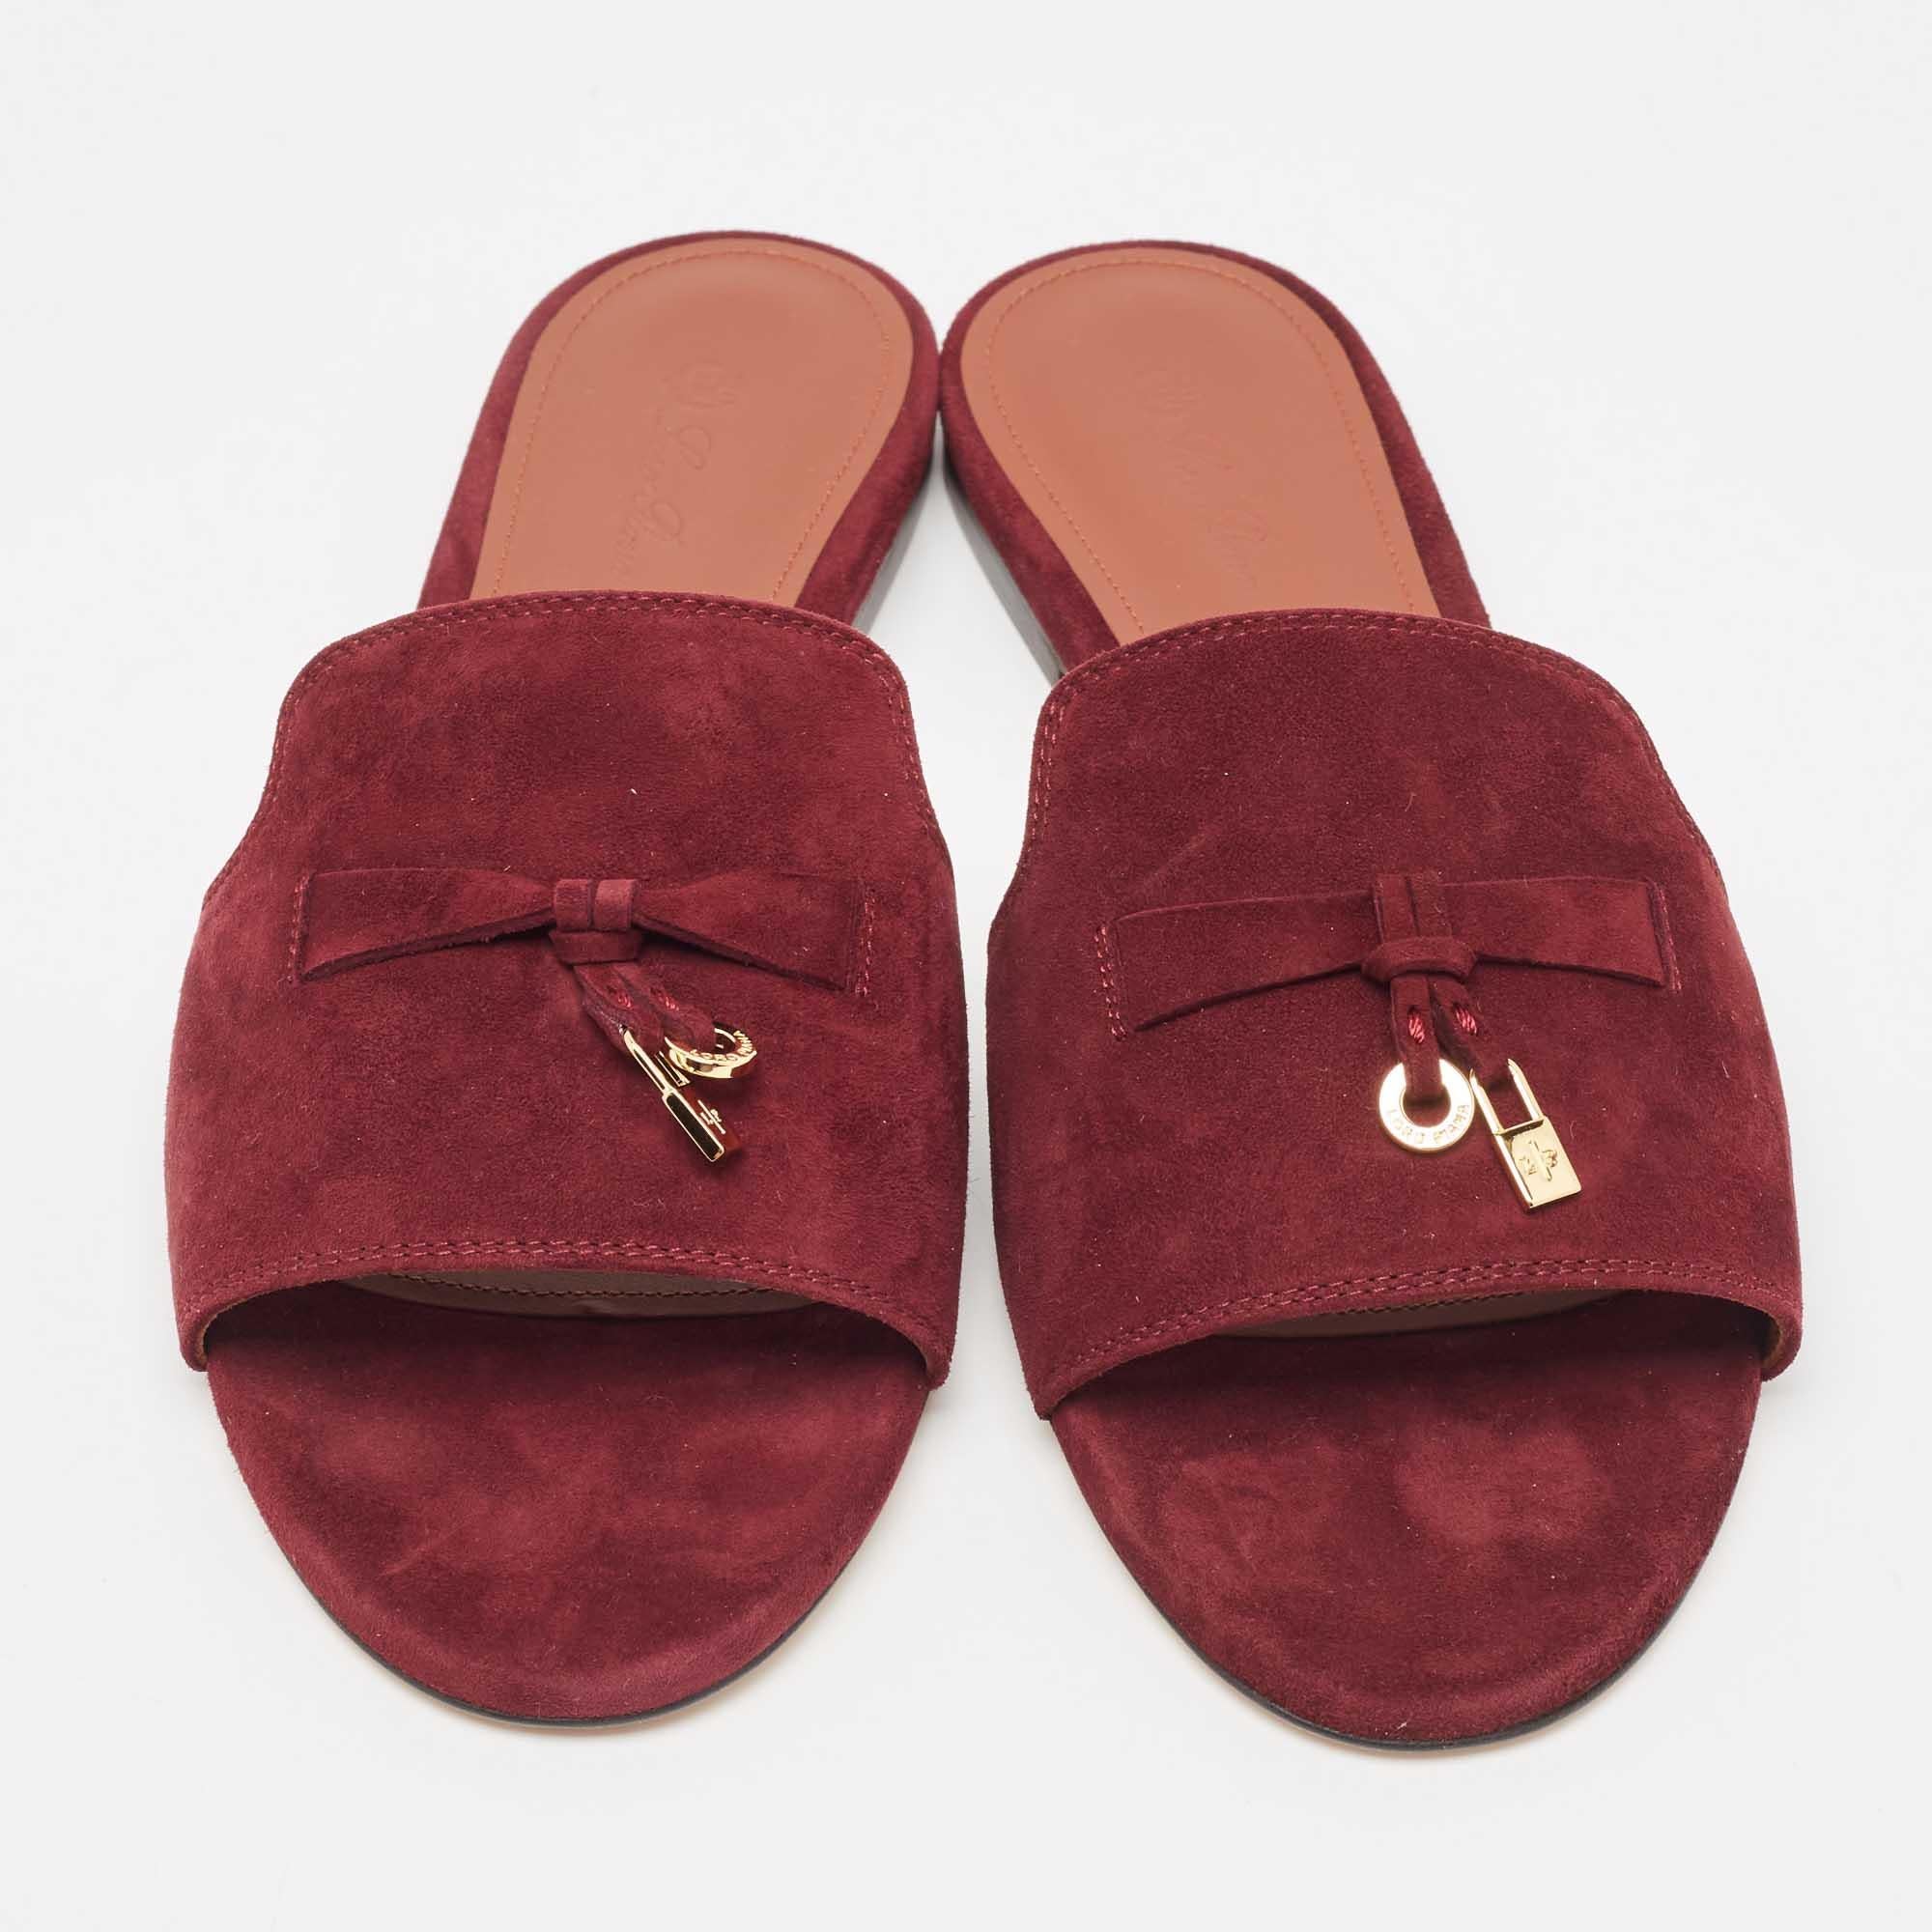 A perfect blend of luxury, style, and comfort, these designer flats are made using quality materials and frame your feet in the most refined way. They can be paired with a host of outfits from your wardrobe.

Includes: Original Dustbag, Original